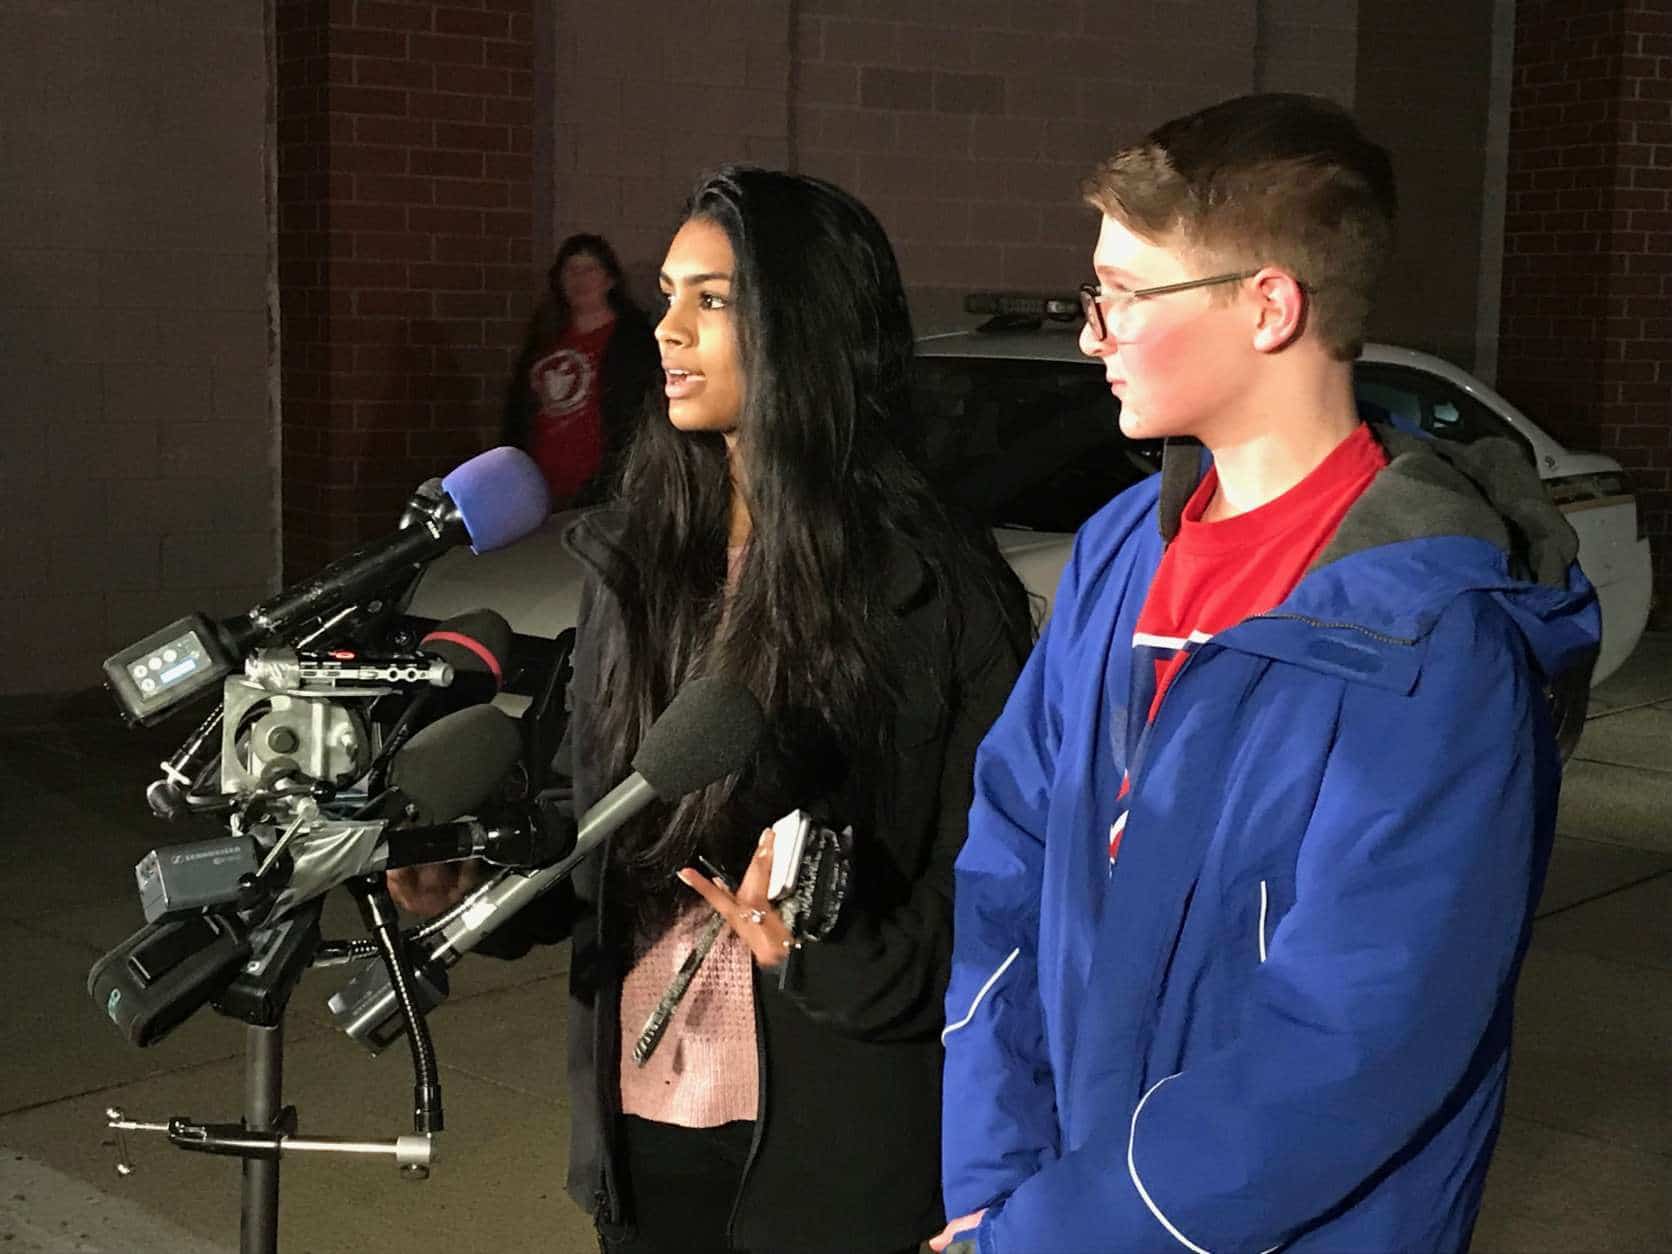 Sahithi Kondan (left) and Joel Shapiro are both sophomores who go to Wootton High School. (WTOP/Michelle Basch)